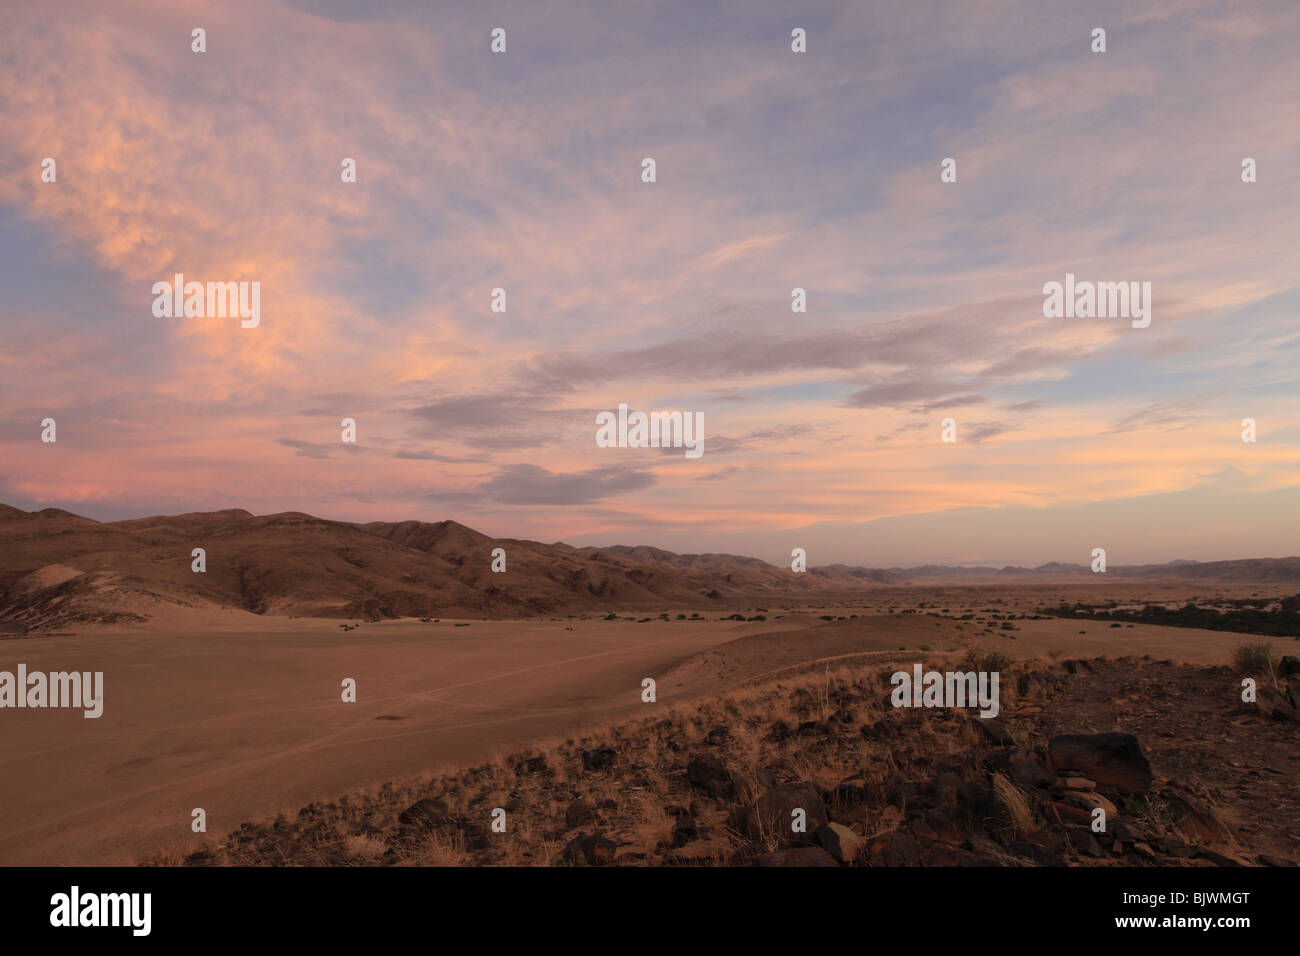 View of Hoarusib valley in Kaokoland Namibia at Sunset Stock Photo